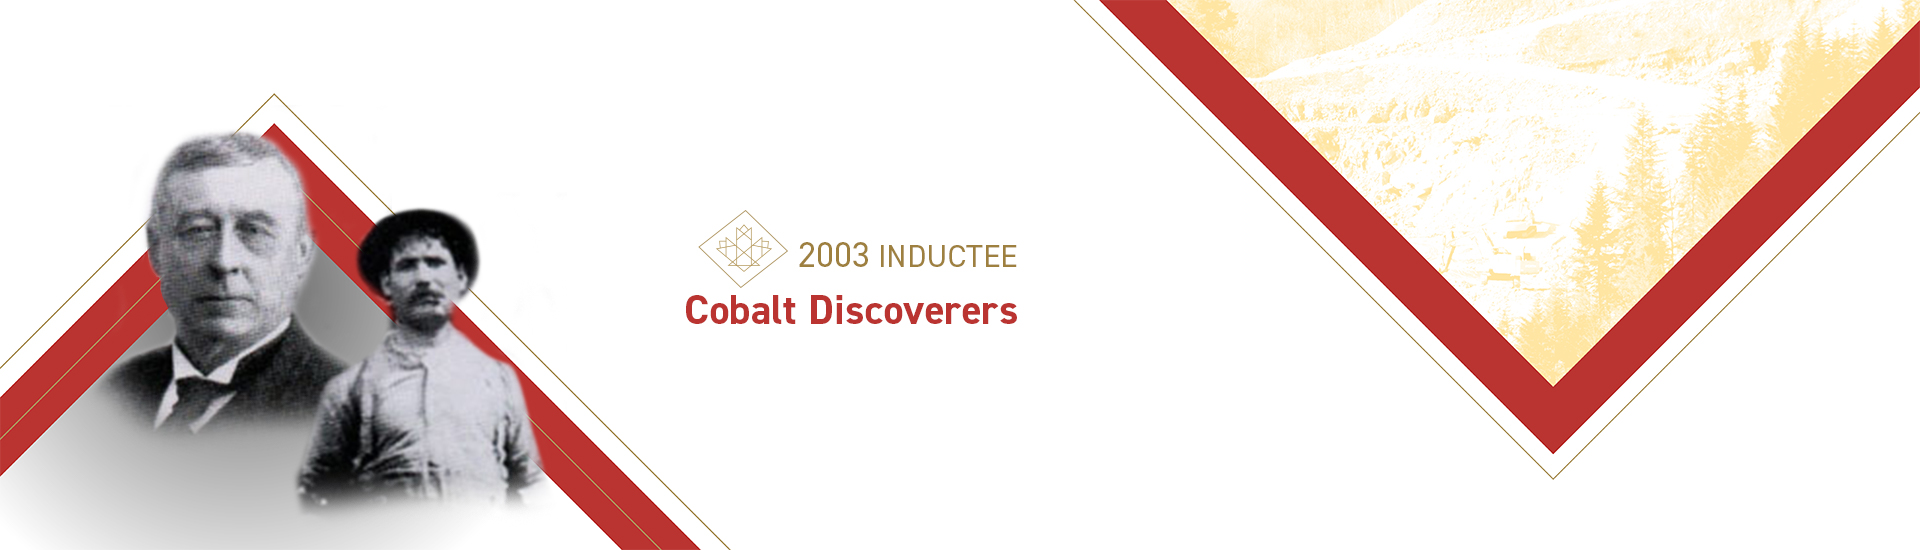 The Cobalt Discoverers